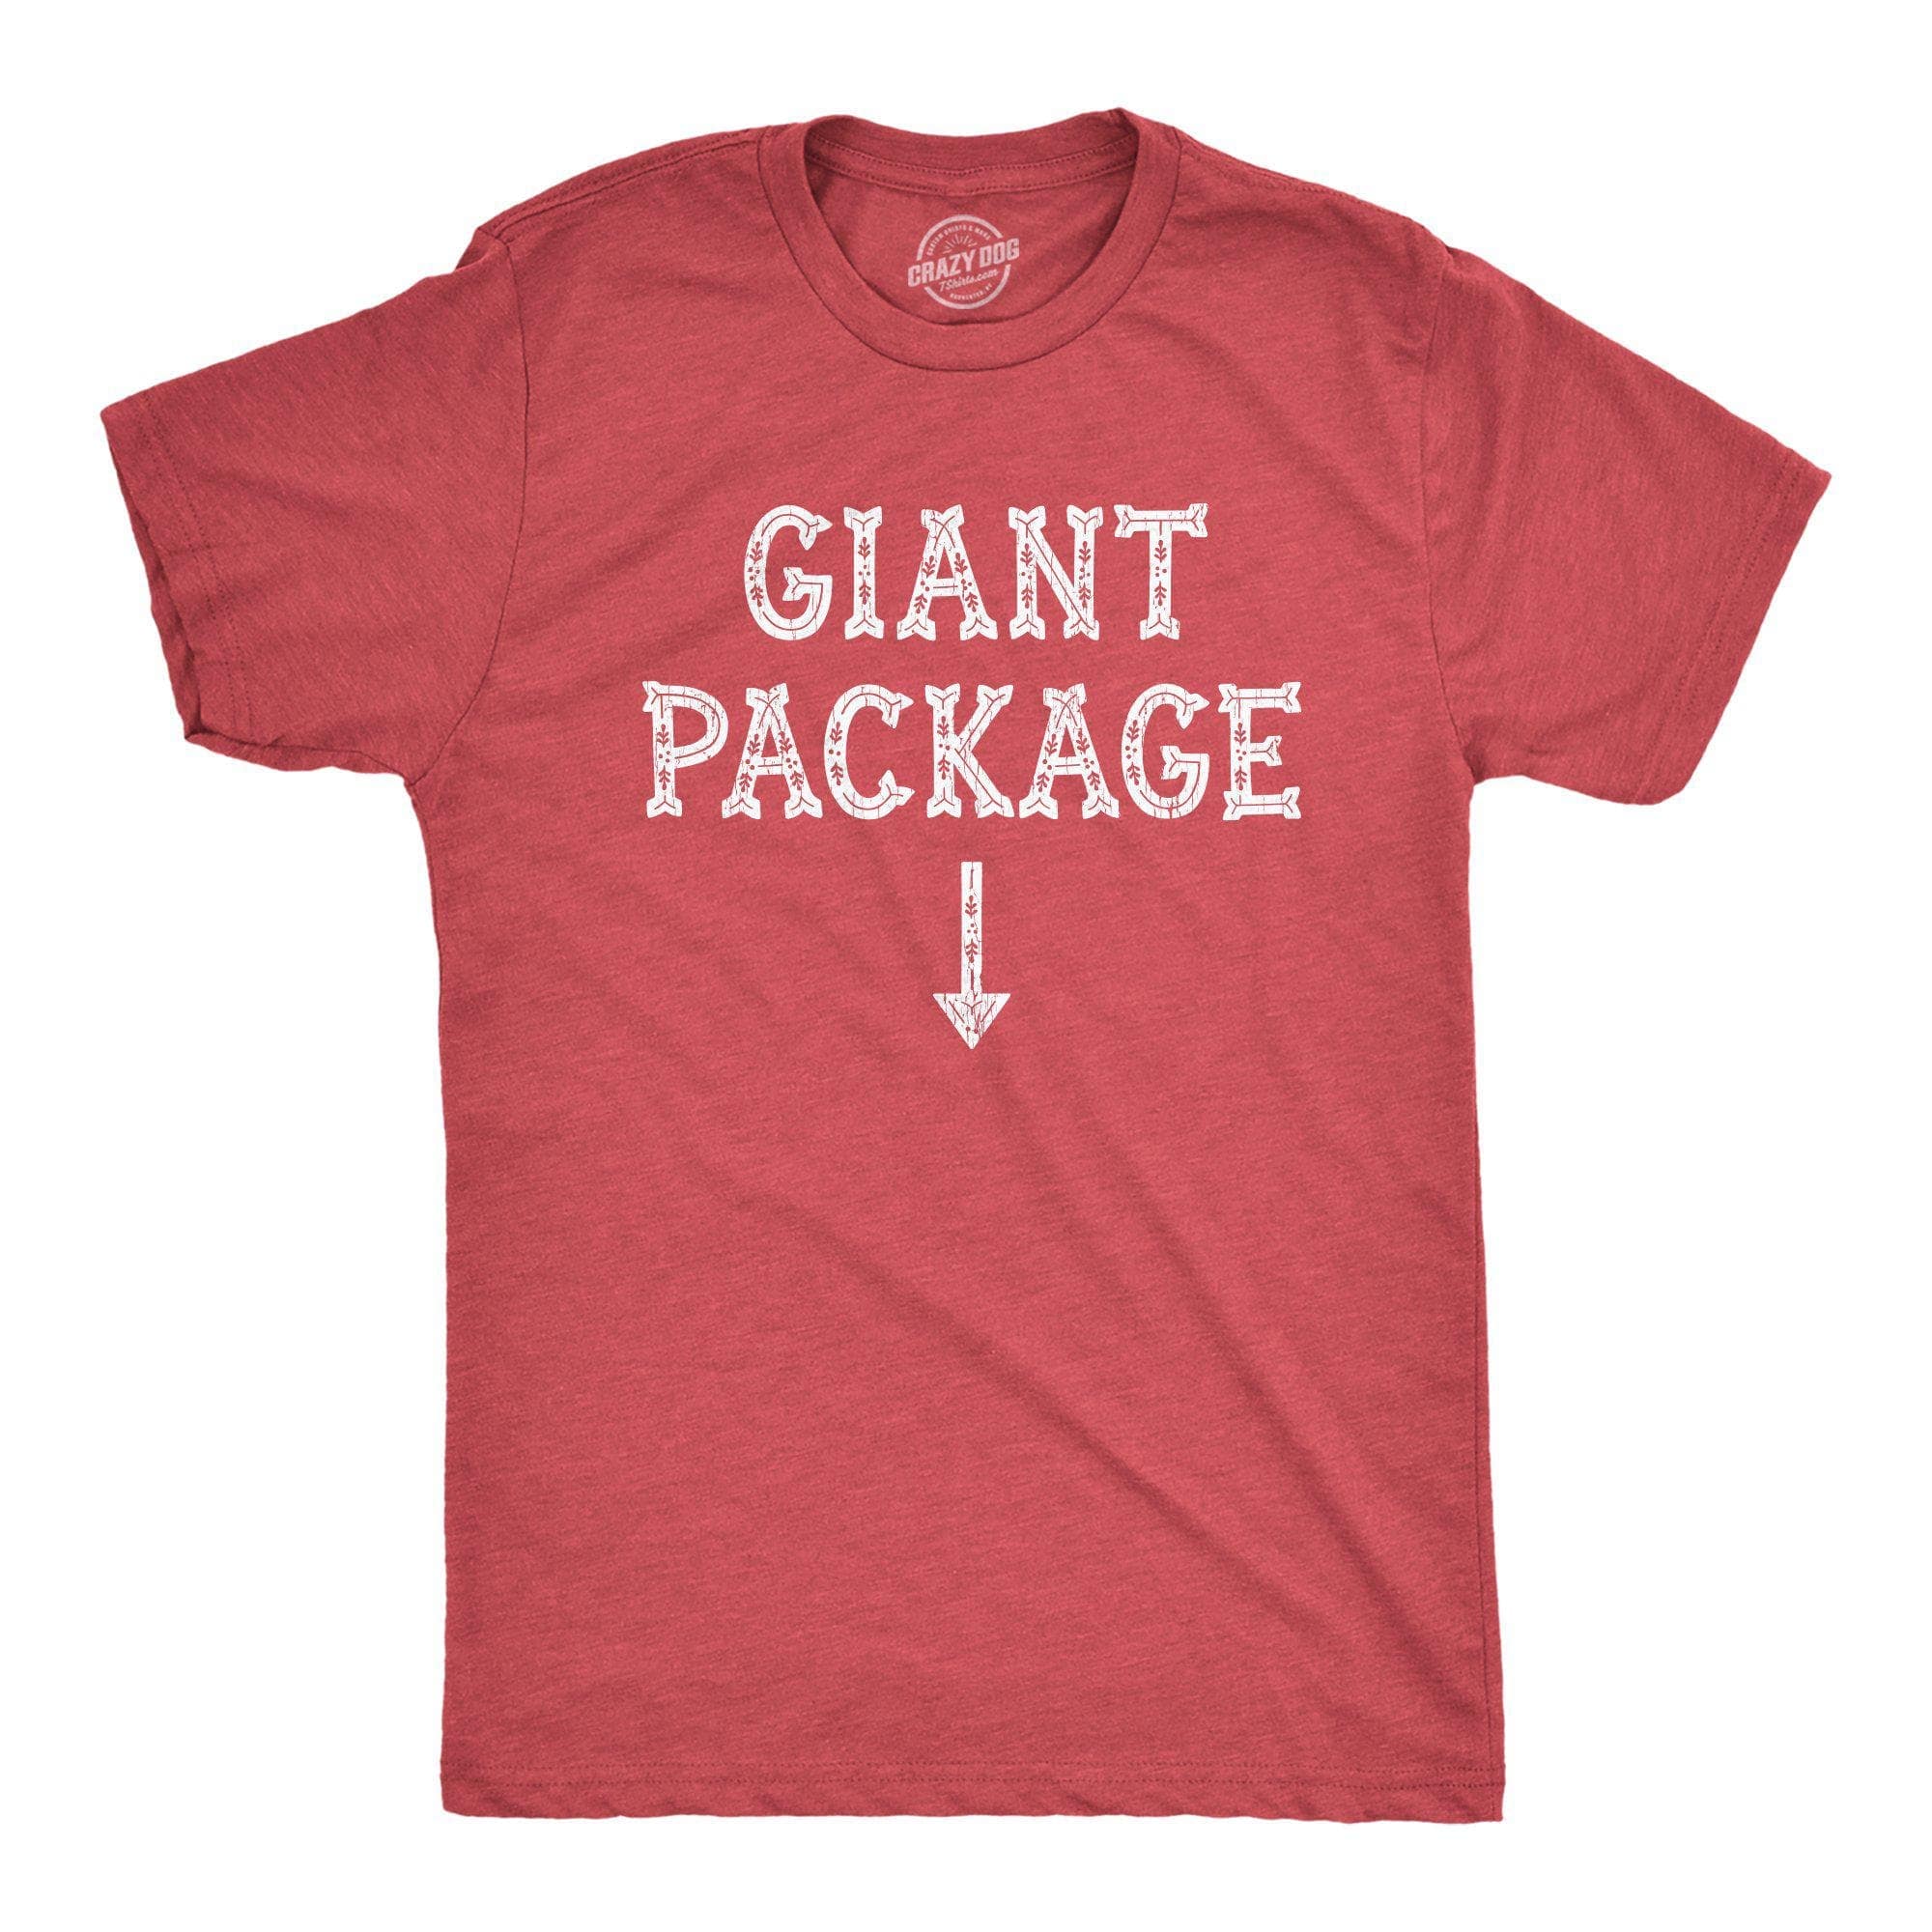 Giant Package Men's Tshirt - Crazy Dog T-Shirts